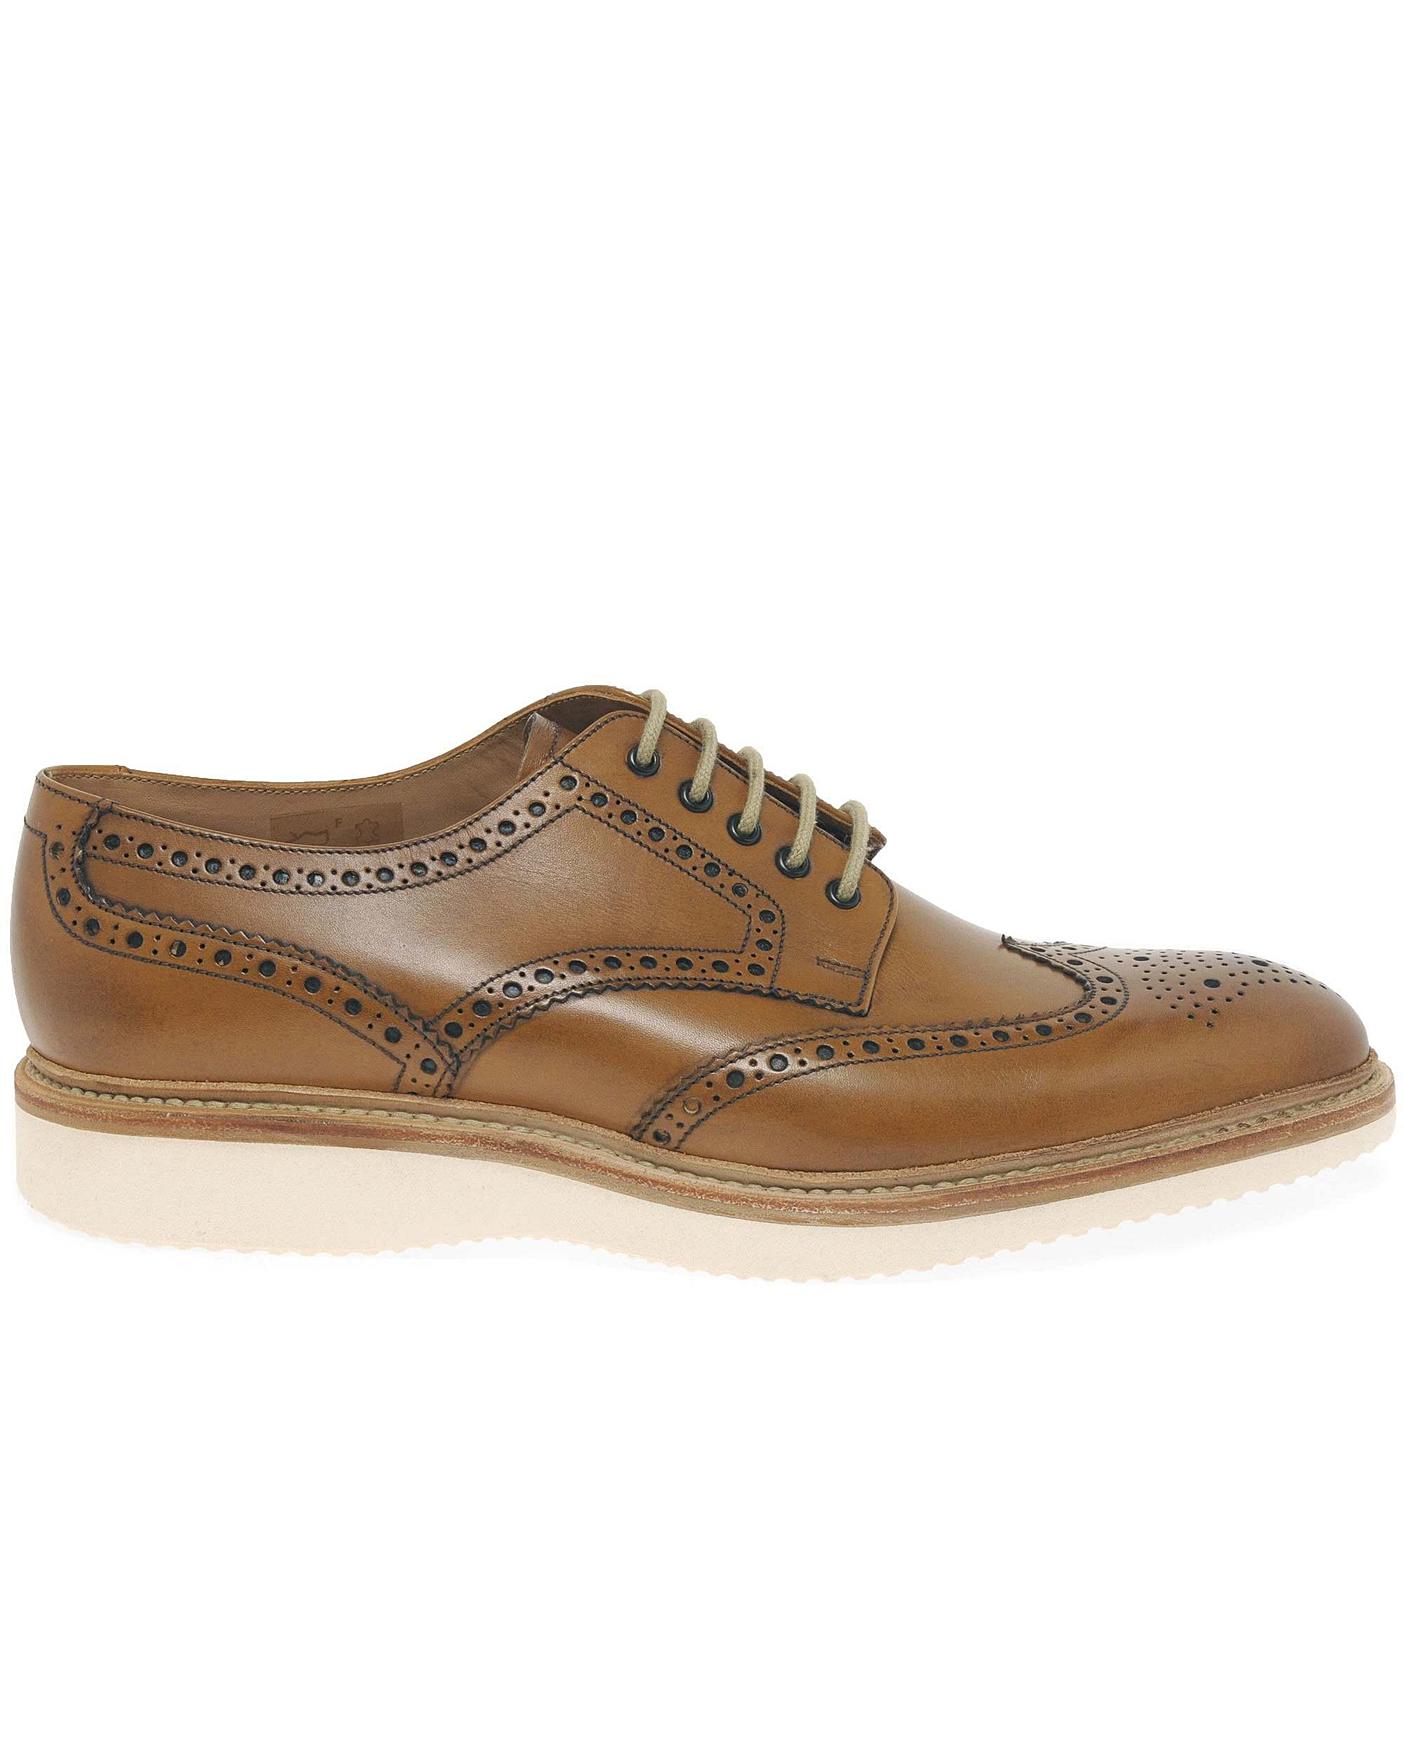 Loake Cobra Wide Fit Brogue Derby Shoes 